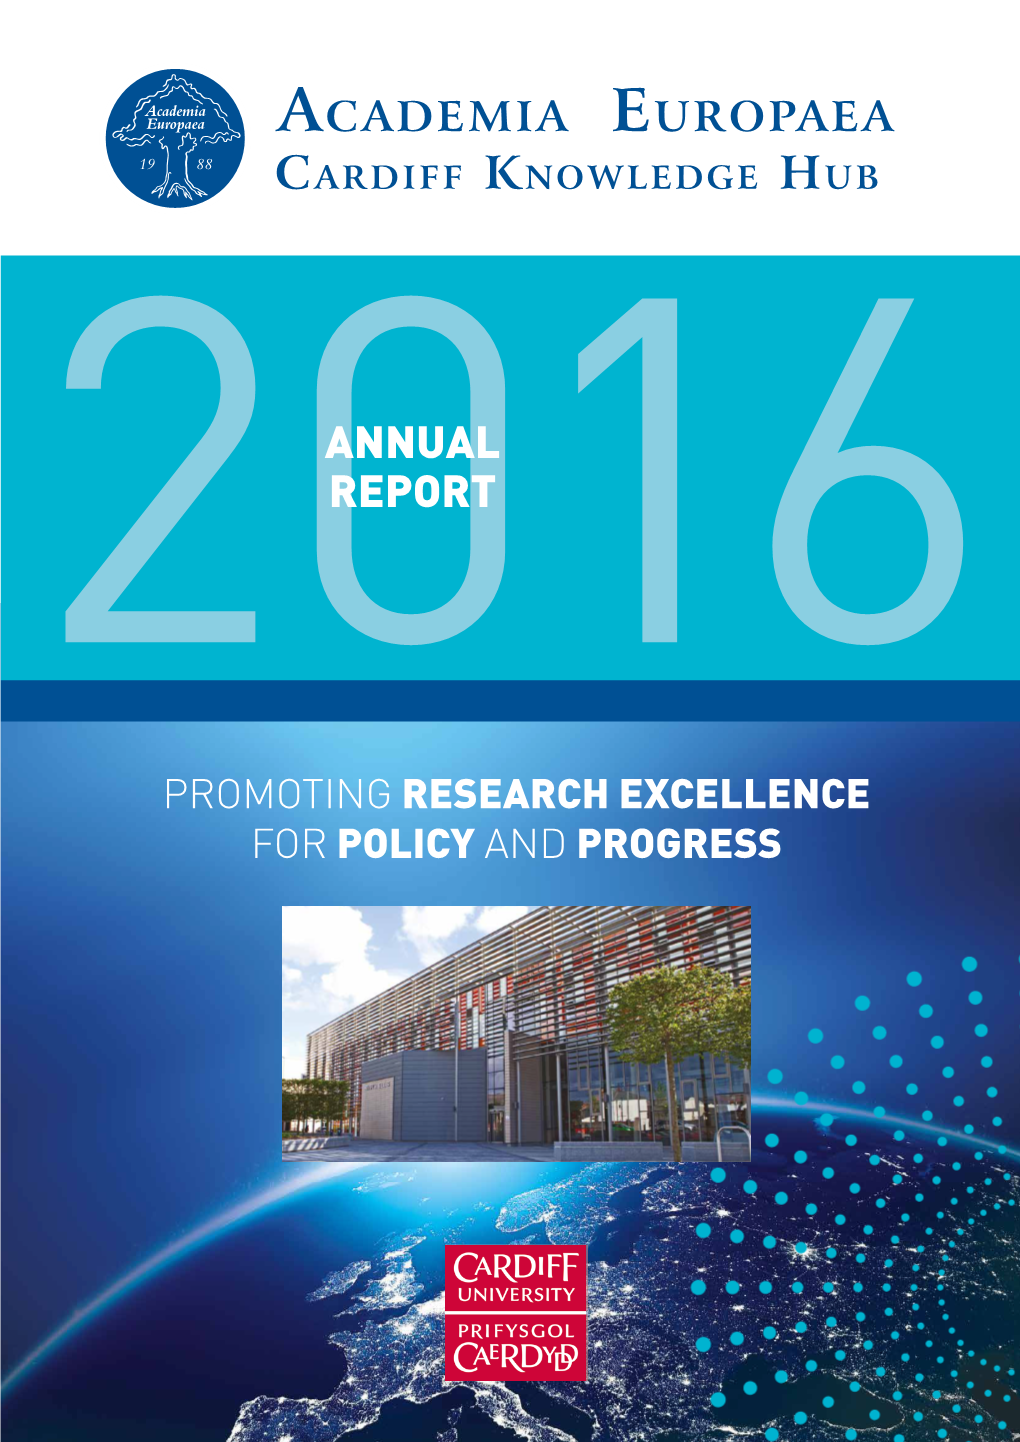 ANNUAL REPORT 2016 Introduction